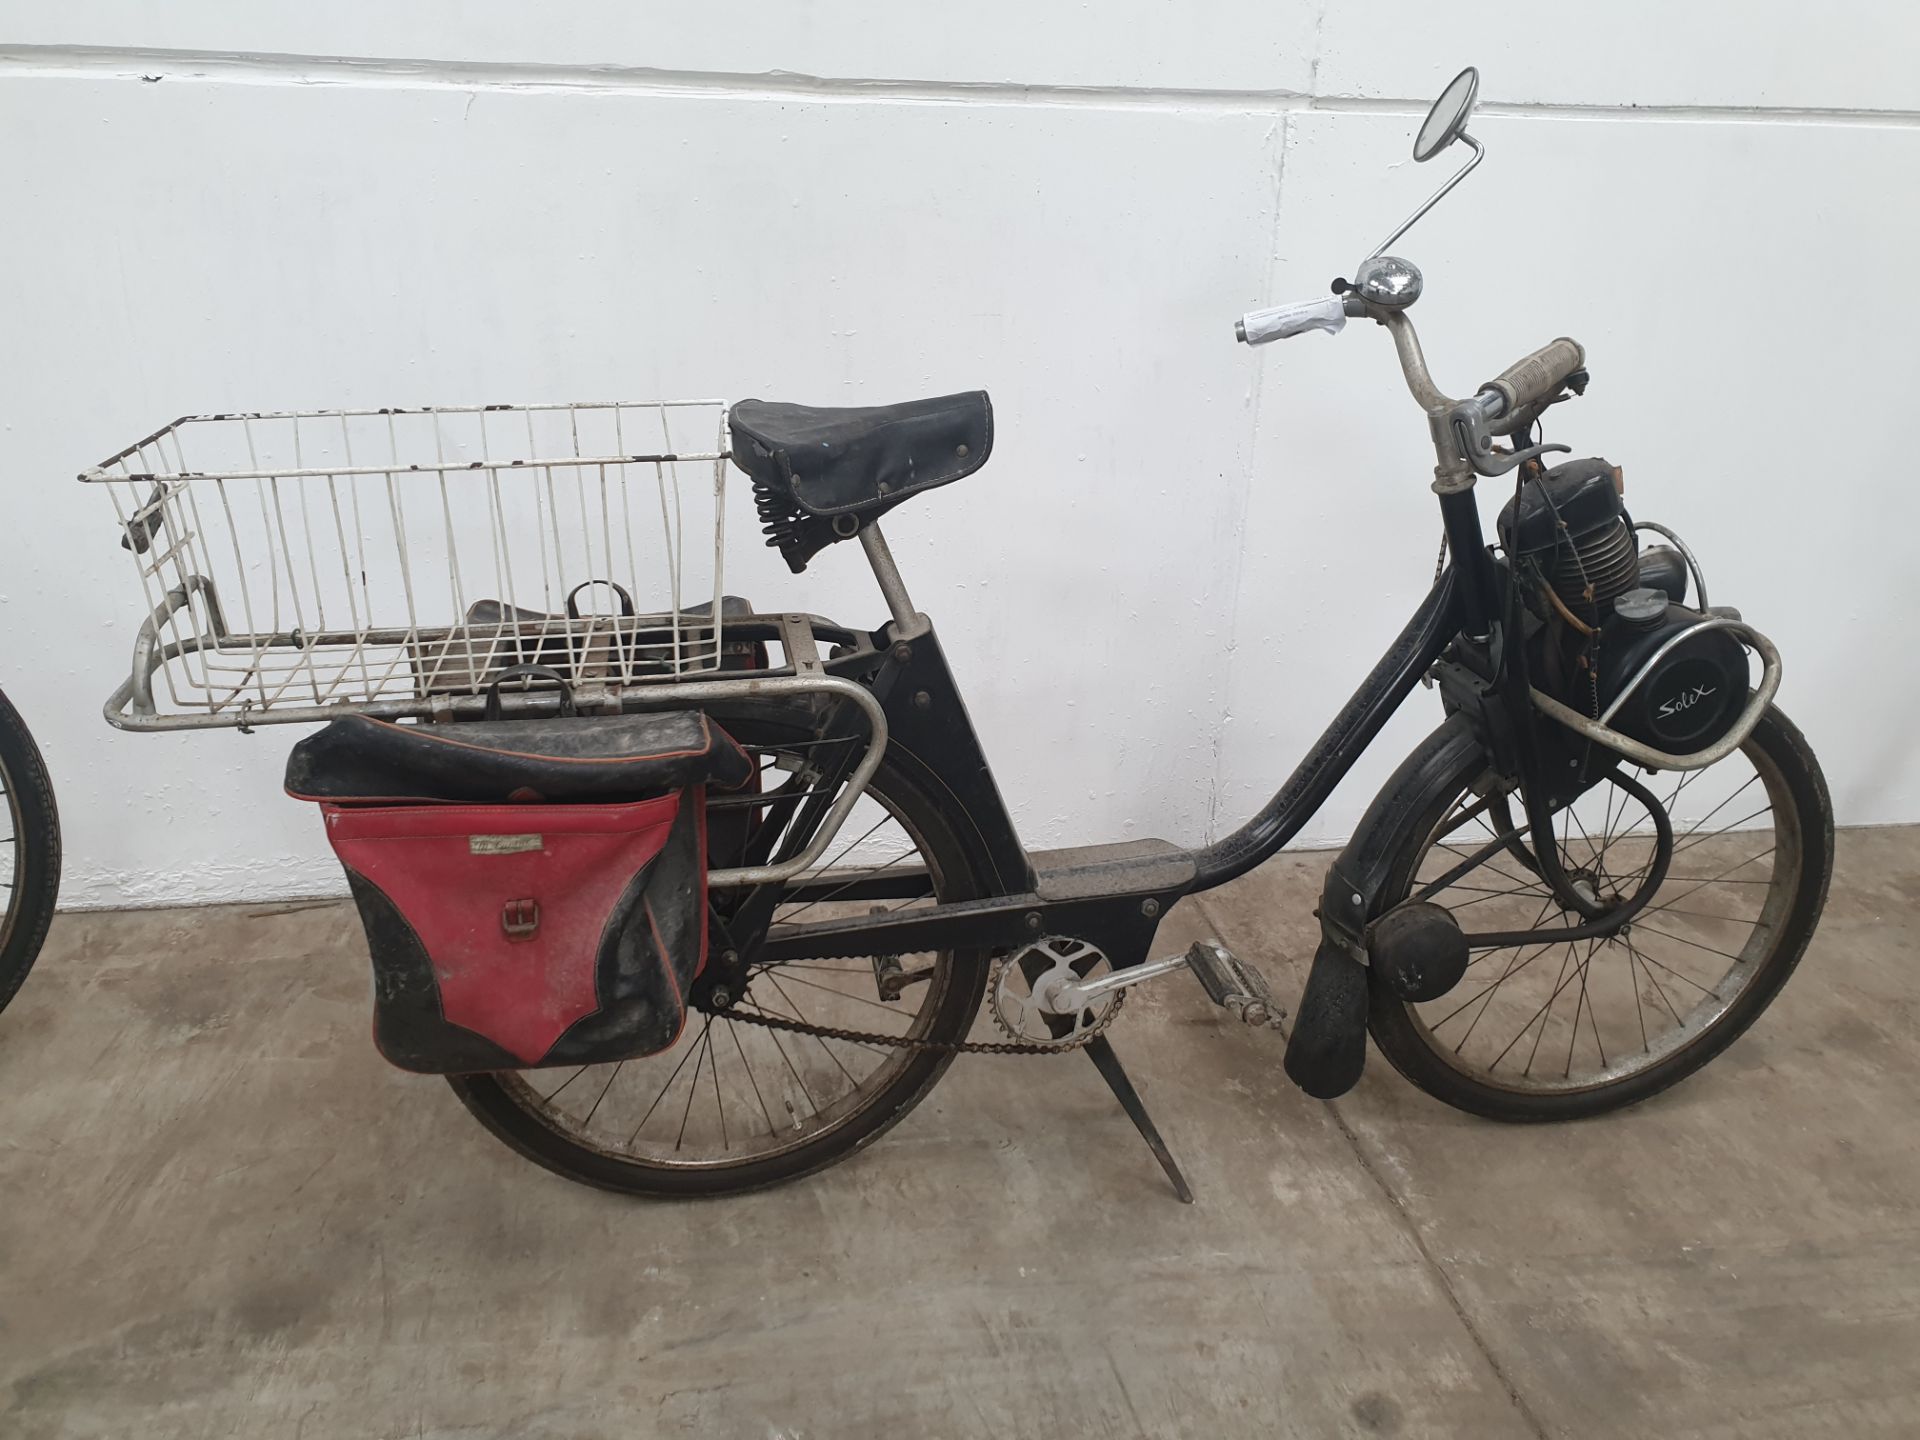 1969 Velo Solex Scooter - NO RESERVE - Image 2 of 2